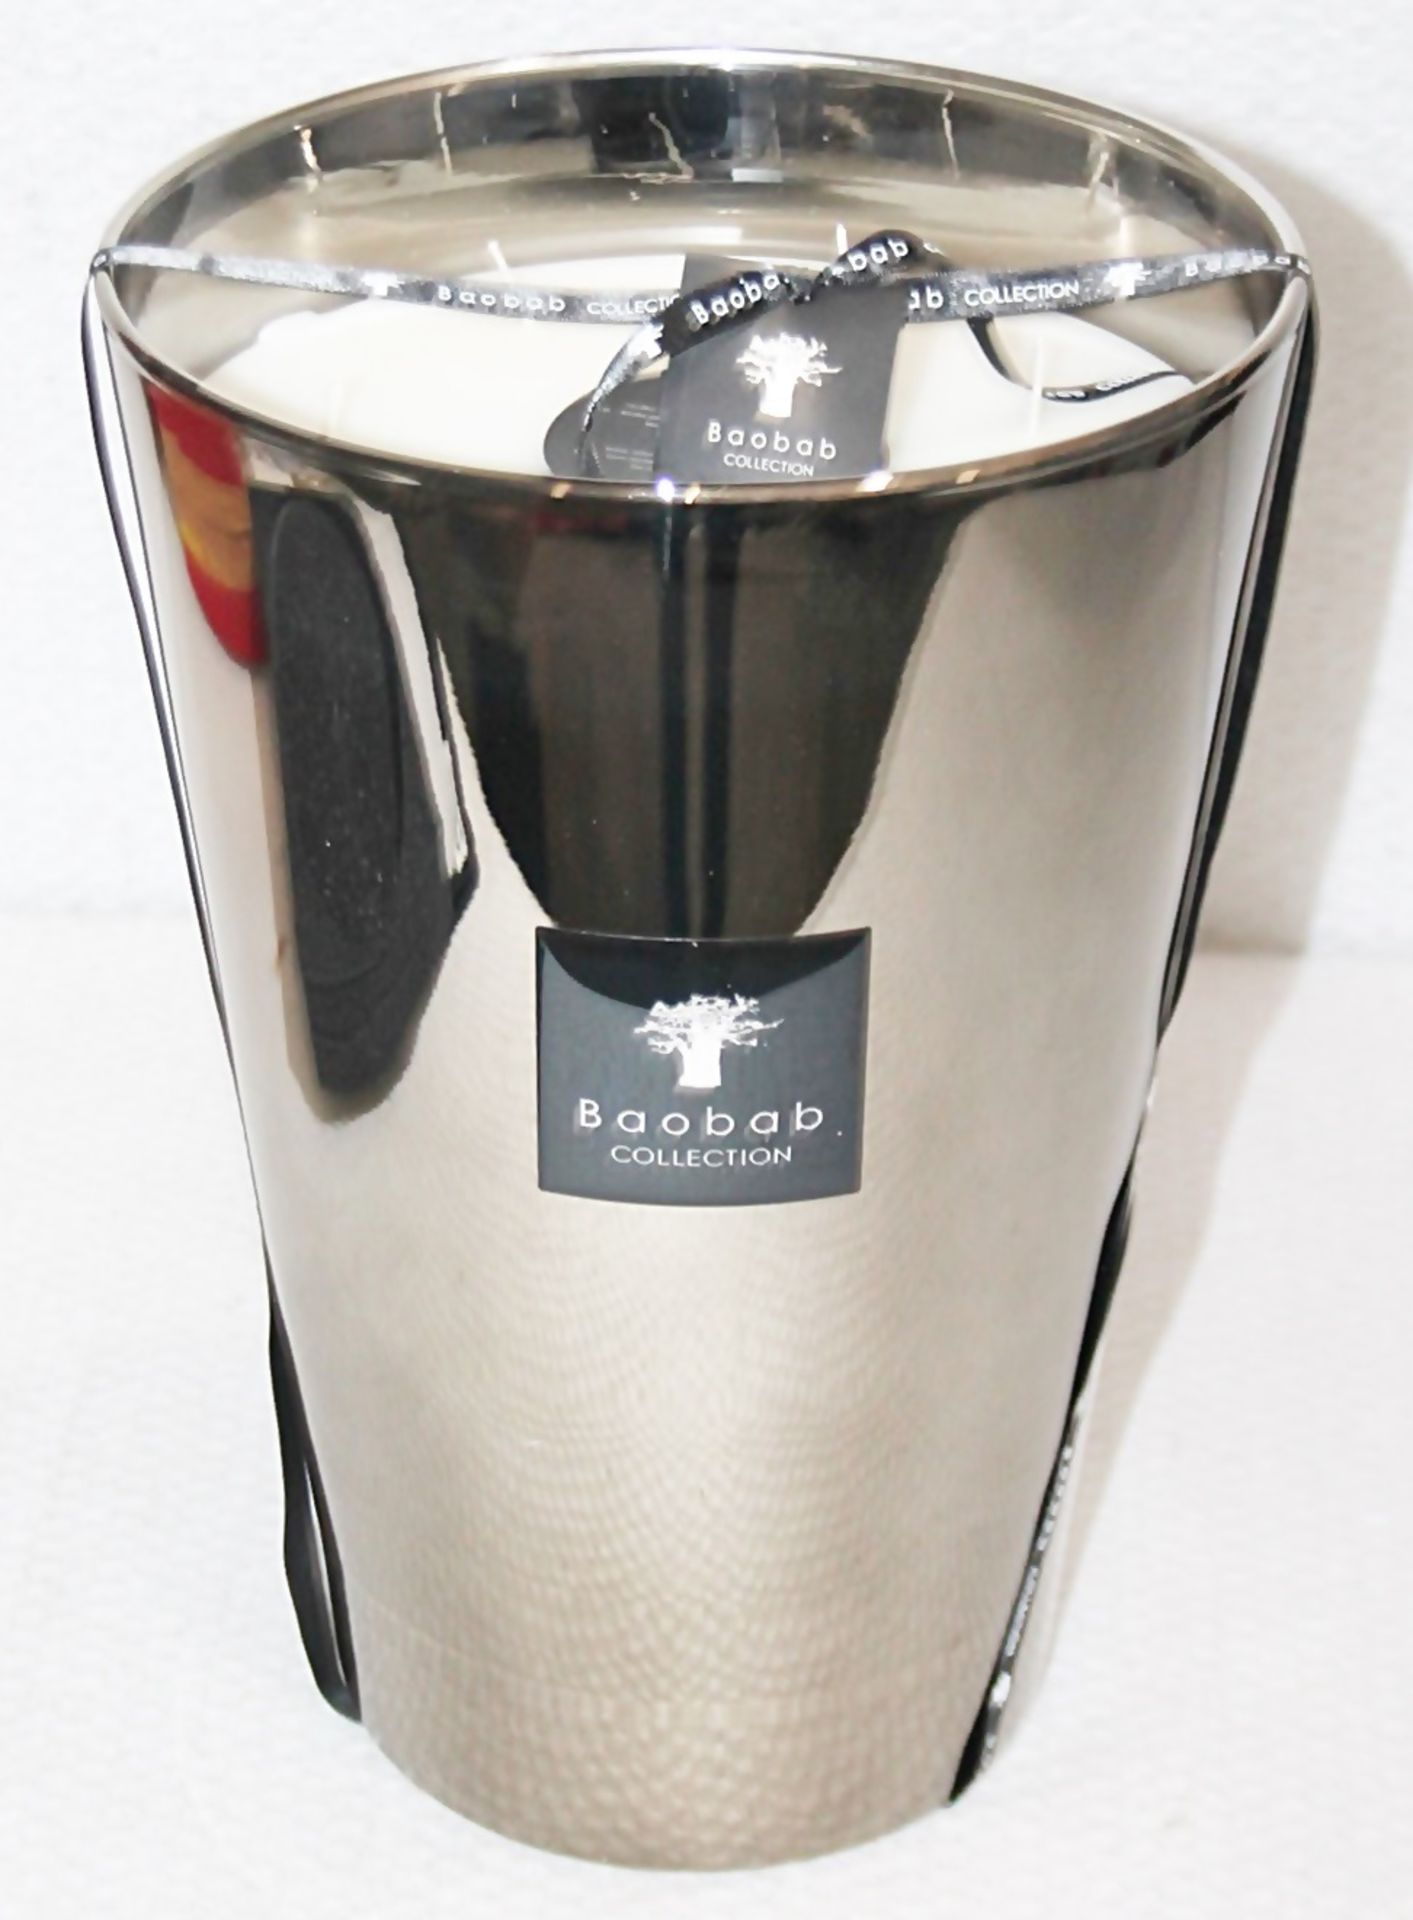 1 x BAOBAB COLLECTION Large 6.5kg 'Les Exclusives' Scented Candle (H35cm) - Original Price £465.00 - - Image 2 of 7